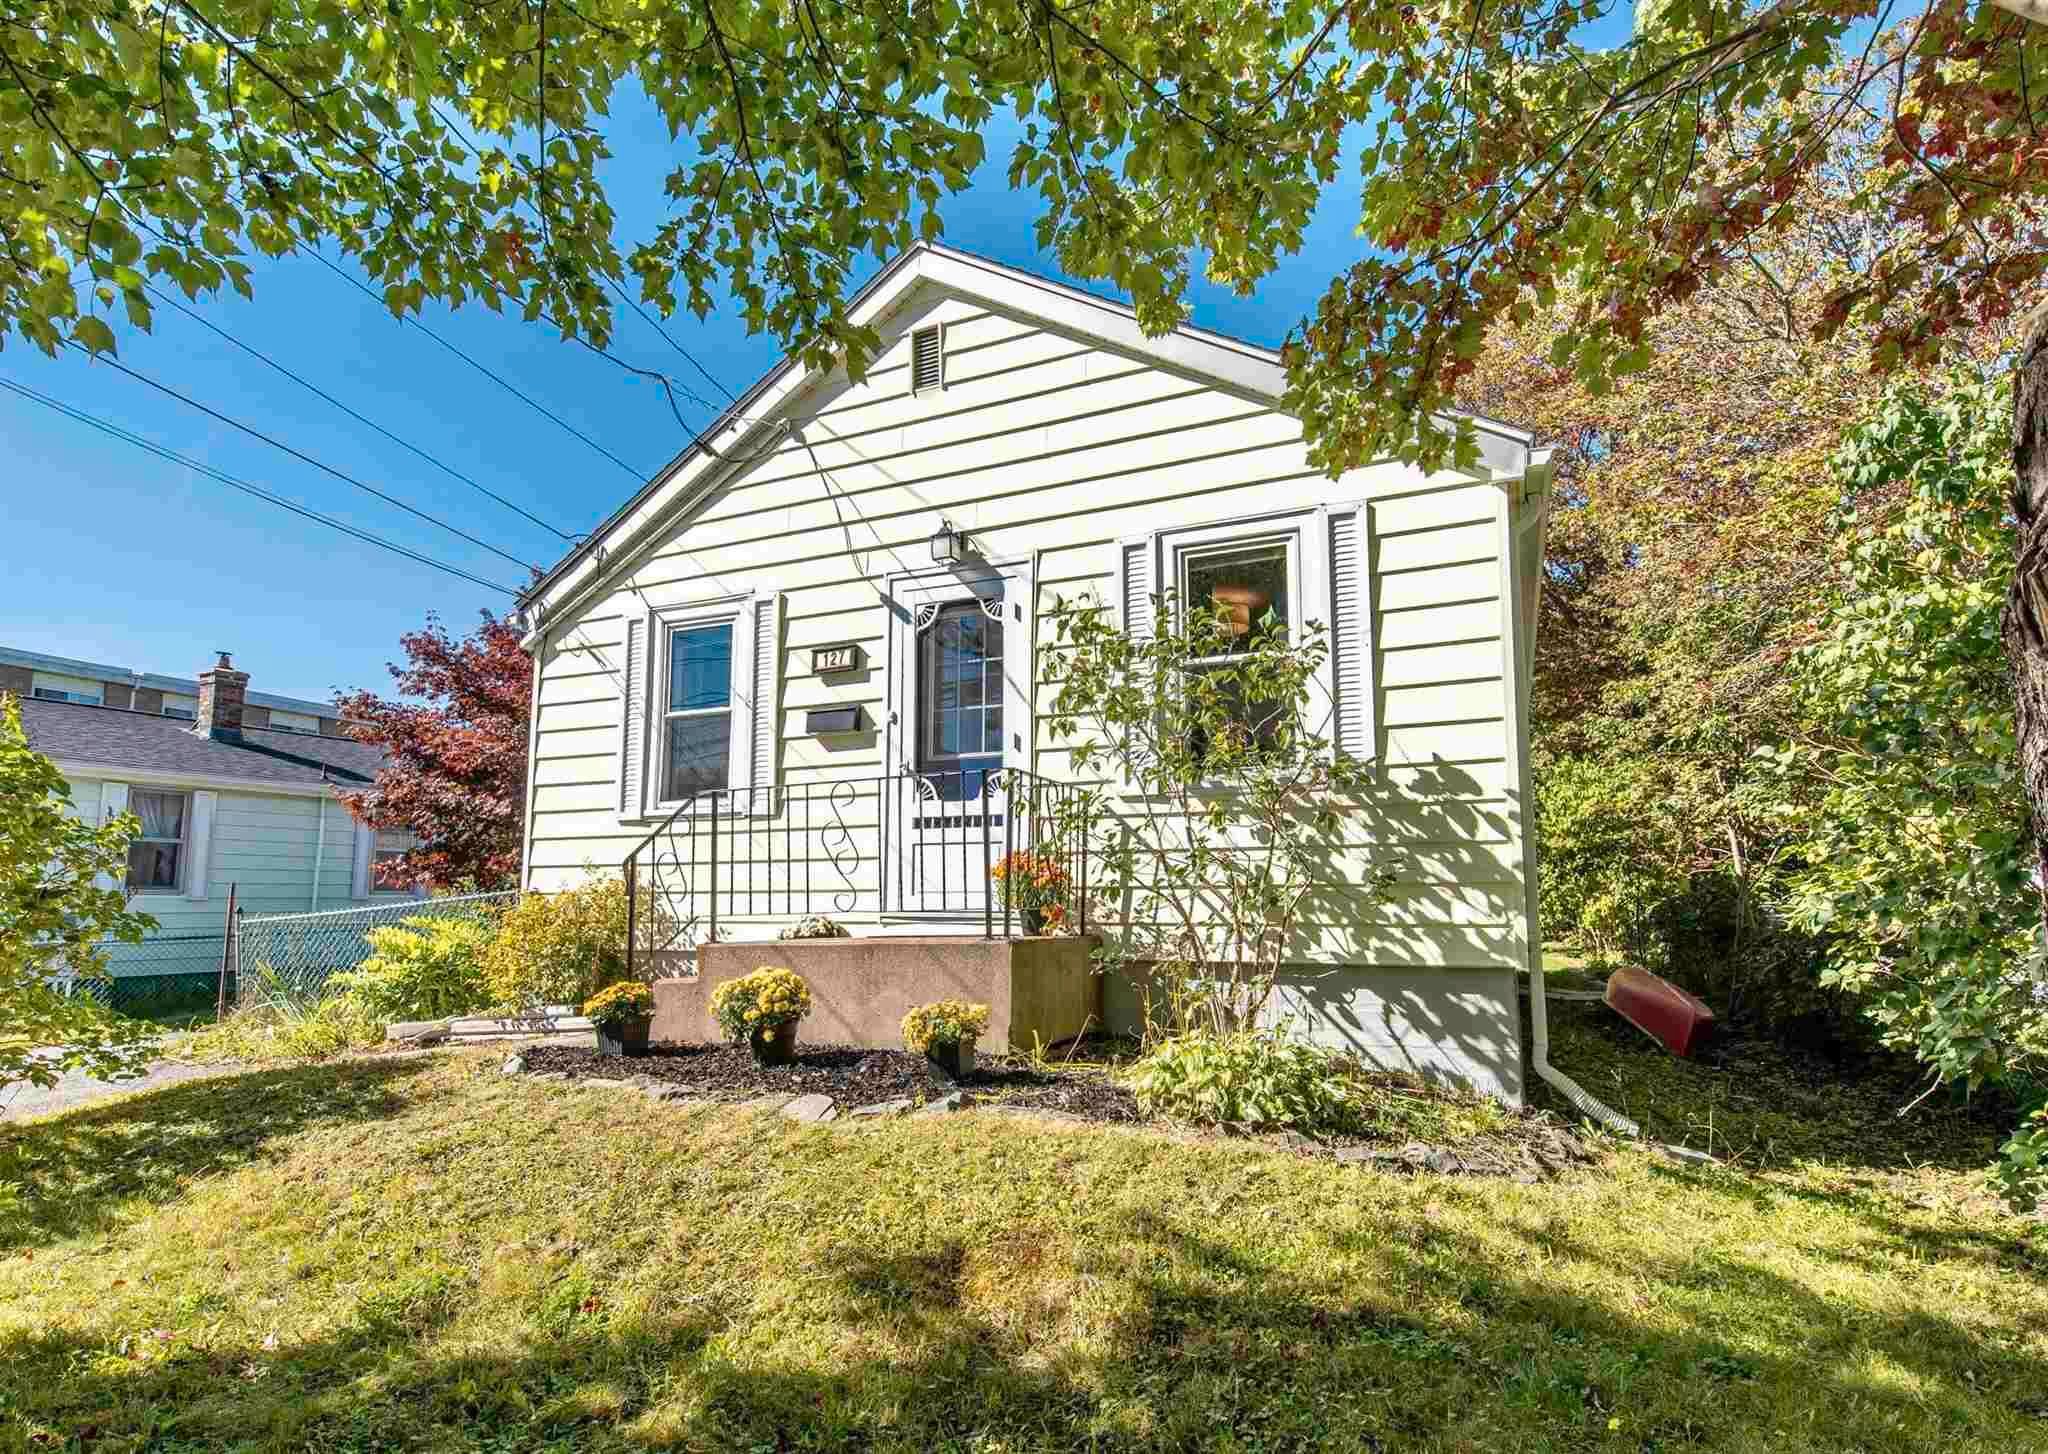 I have sold a property at 127 Albro Lake Road in Dartmouth
